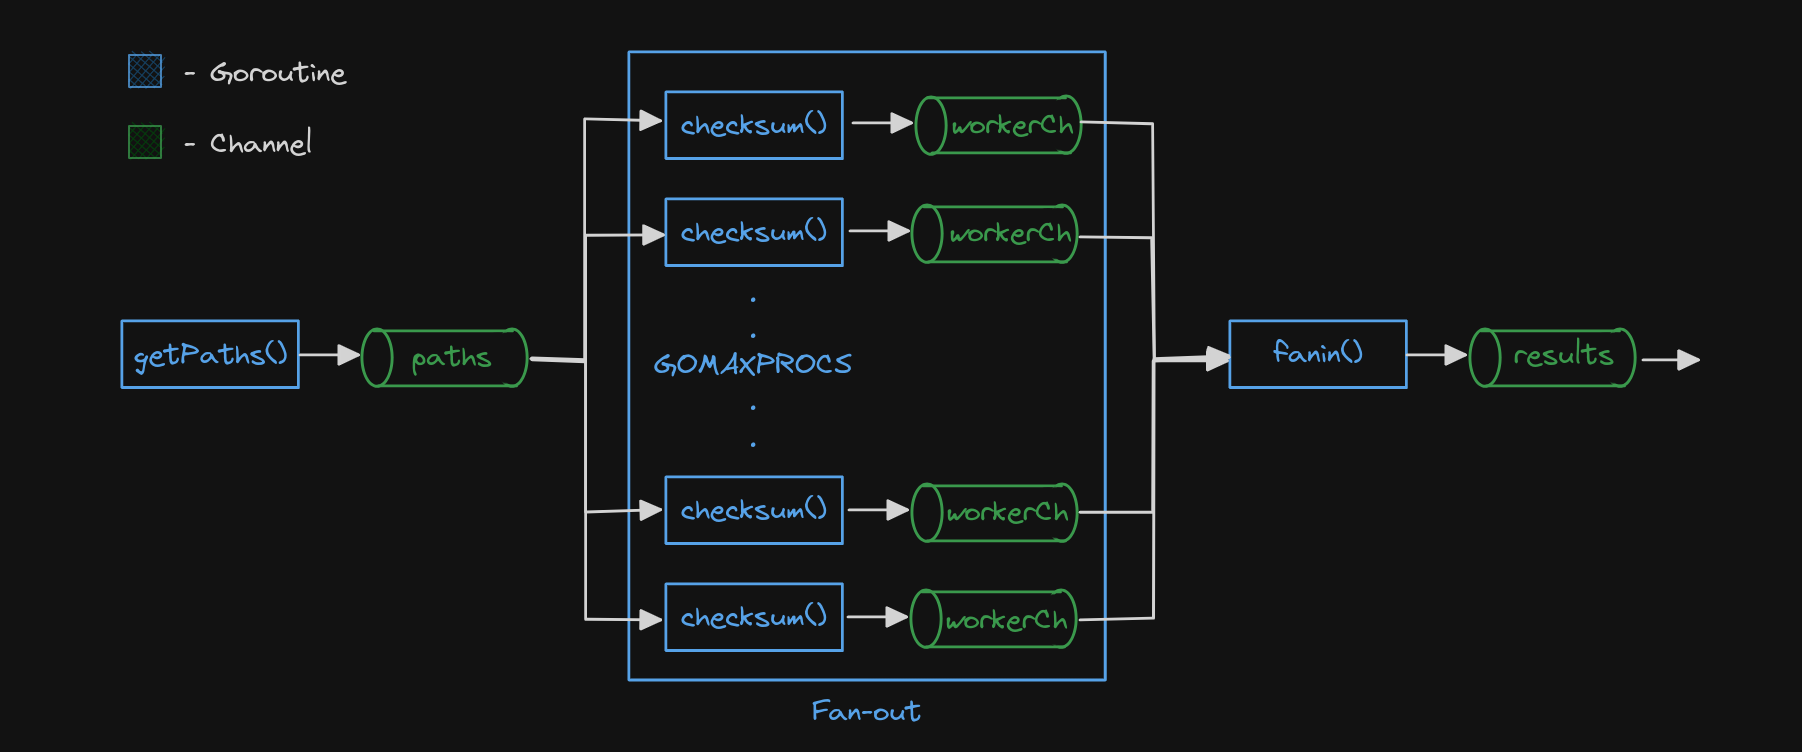 Concurrency model